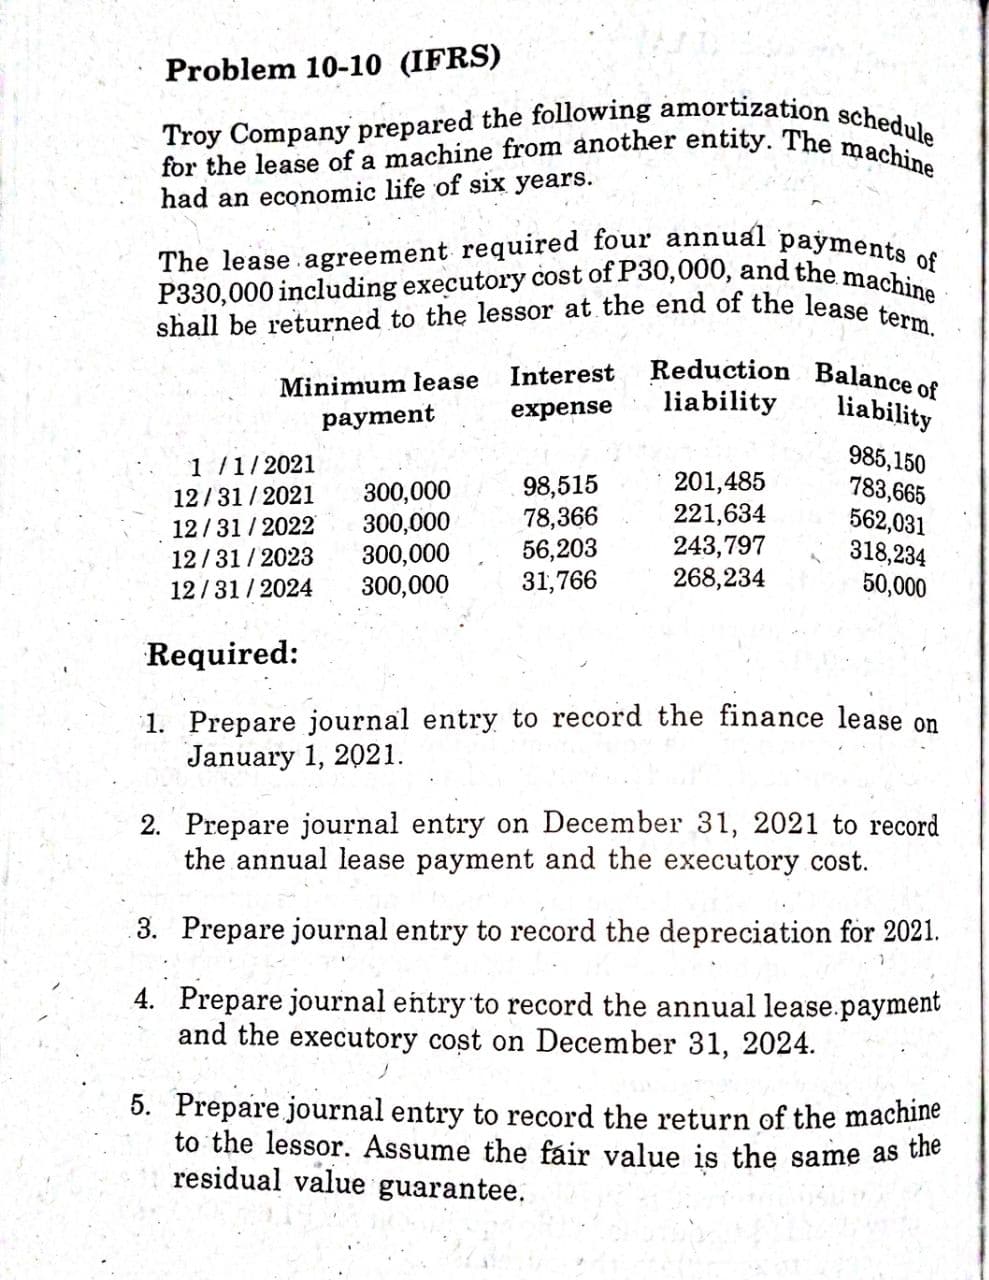 P330,000 including executory cost of P30,000, and the machine ·
for the lease of a machine from another entity. The machine
Troy Company prepared the following amortization schedule
shall be returned to the lessor at the end of the lease term.
The lease agreement required four annual payments of
Problem 10-10 (IFRS)
had an economic life of six years.
Reduction Balance of
liability
Interest
Minimum lease
payment
expense
liability
1 /1/2021
12/31/ 2021
12/31/2022
12/31/ 2023
12/31/ 2024
300,000
300,000
300,000
300,000
98,515
78,366
56,203
31,766
201,485
221,634
243,797
268,234
985,150
783,665
562,031
318,234
50,000
Required:
1. Prepare journal entry to record the finance lease on
January 1, 2021.
2. Prepare journal entry on December 31, 2021 to record
the annual lease payment and the executory cost.
3. Prepare journal entry to record the depreciation for 2021.
4. Prepare journal entry to record the annual lease.payment
and the executory cost on December 31, 2024.
5. Prepare journal entry to record the return of the machine
to the lessor. Assume the fáir value is the same as the
residual value guarantee.
